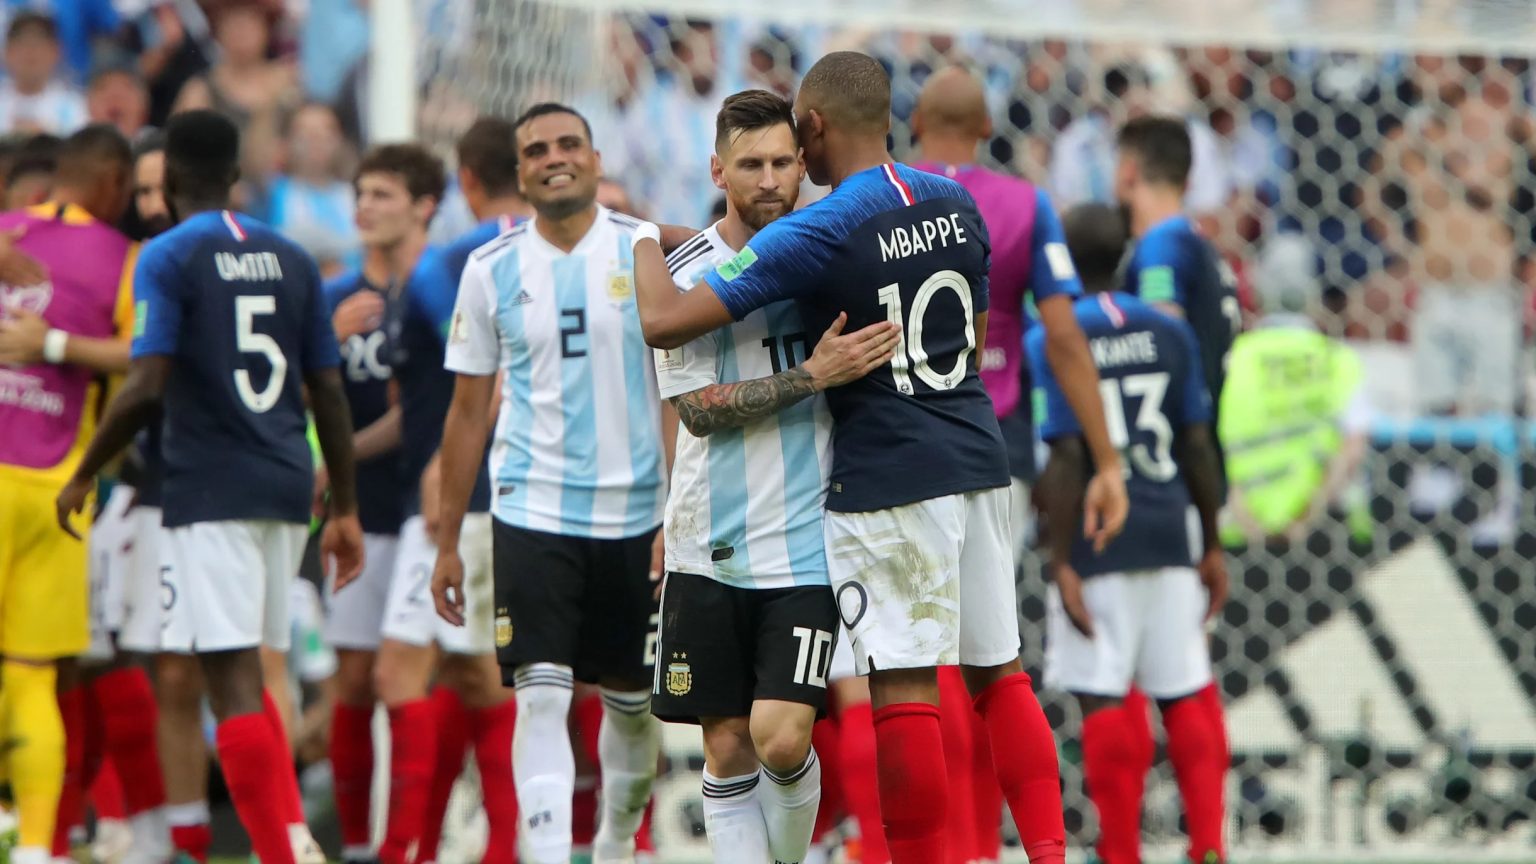 Players of Argentina and France battling on the field